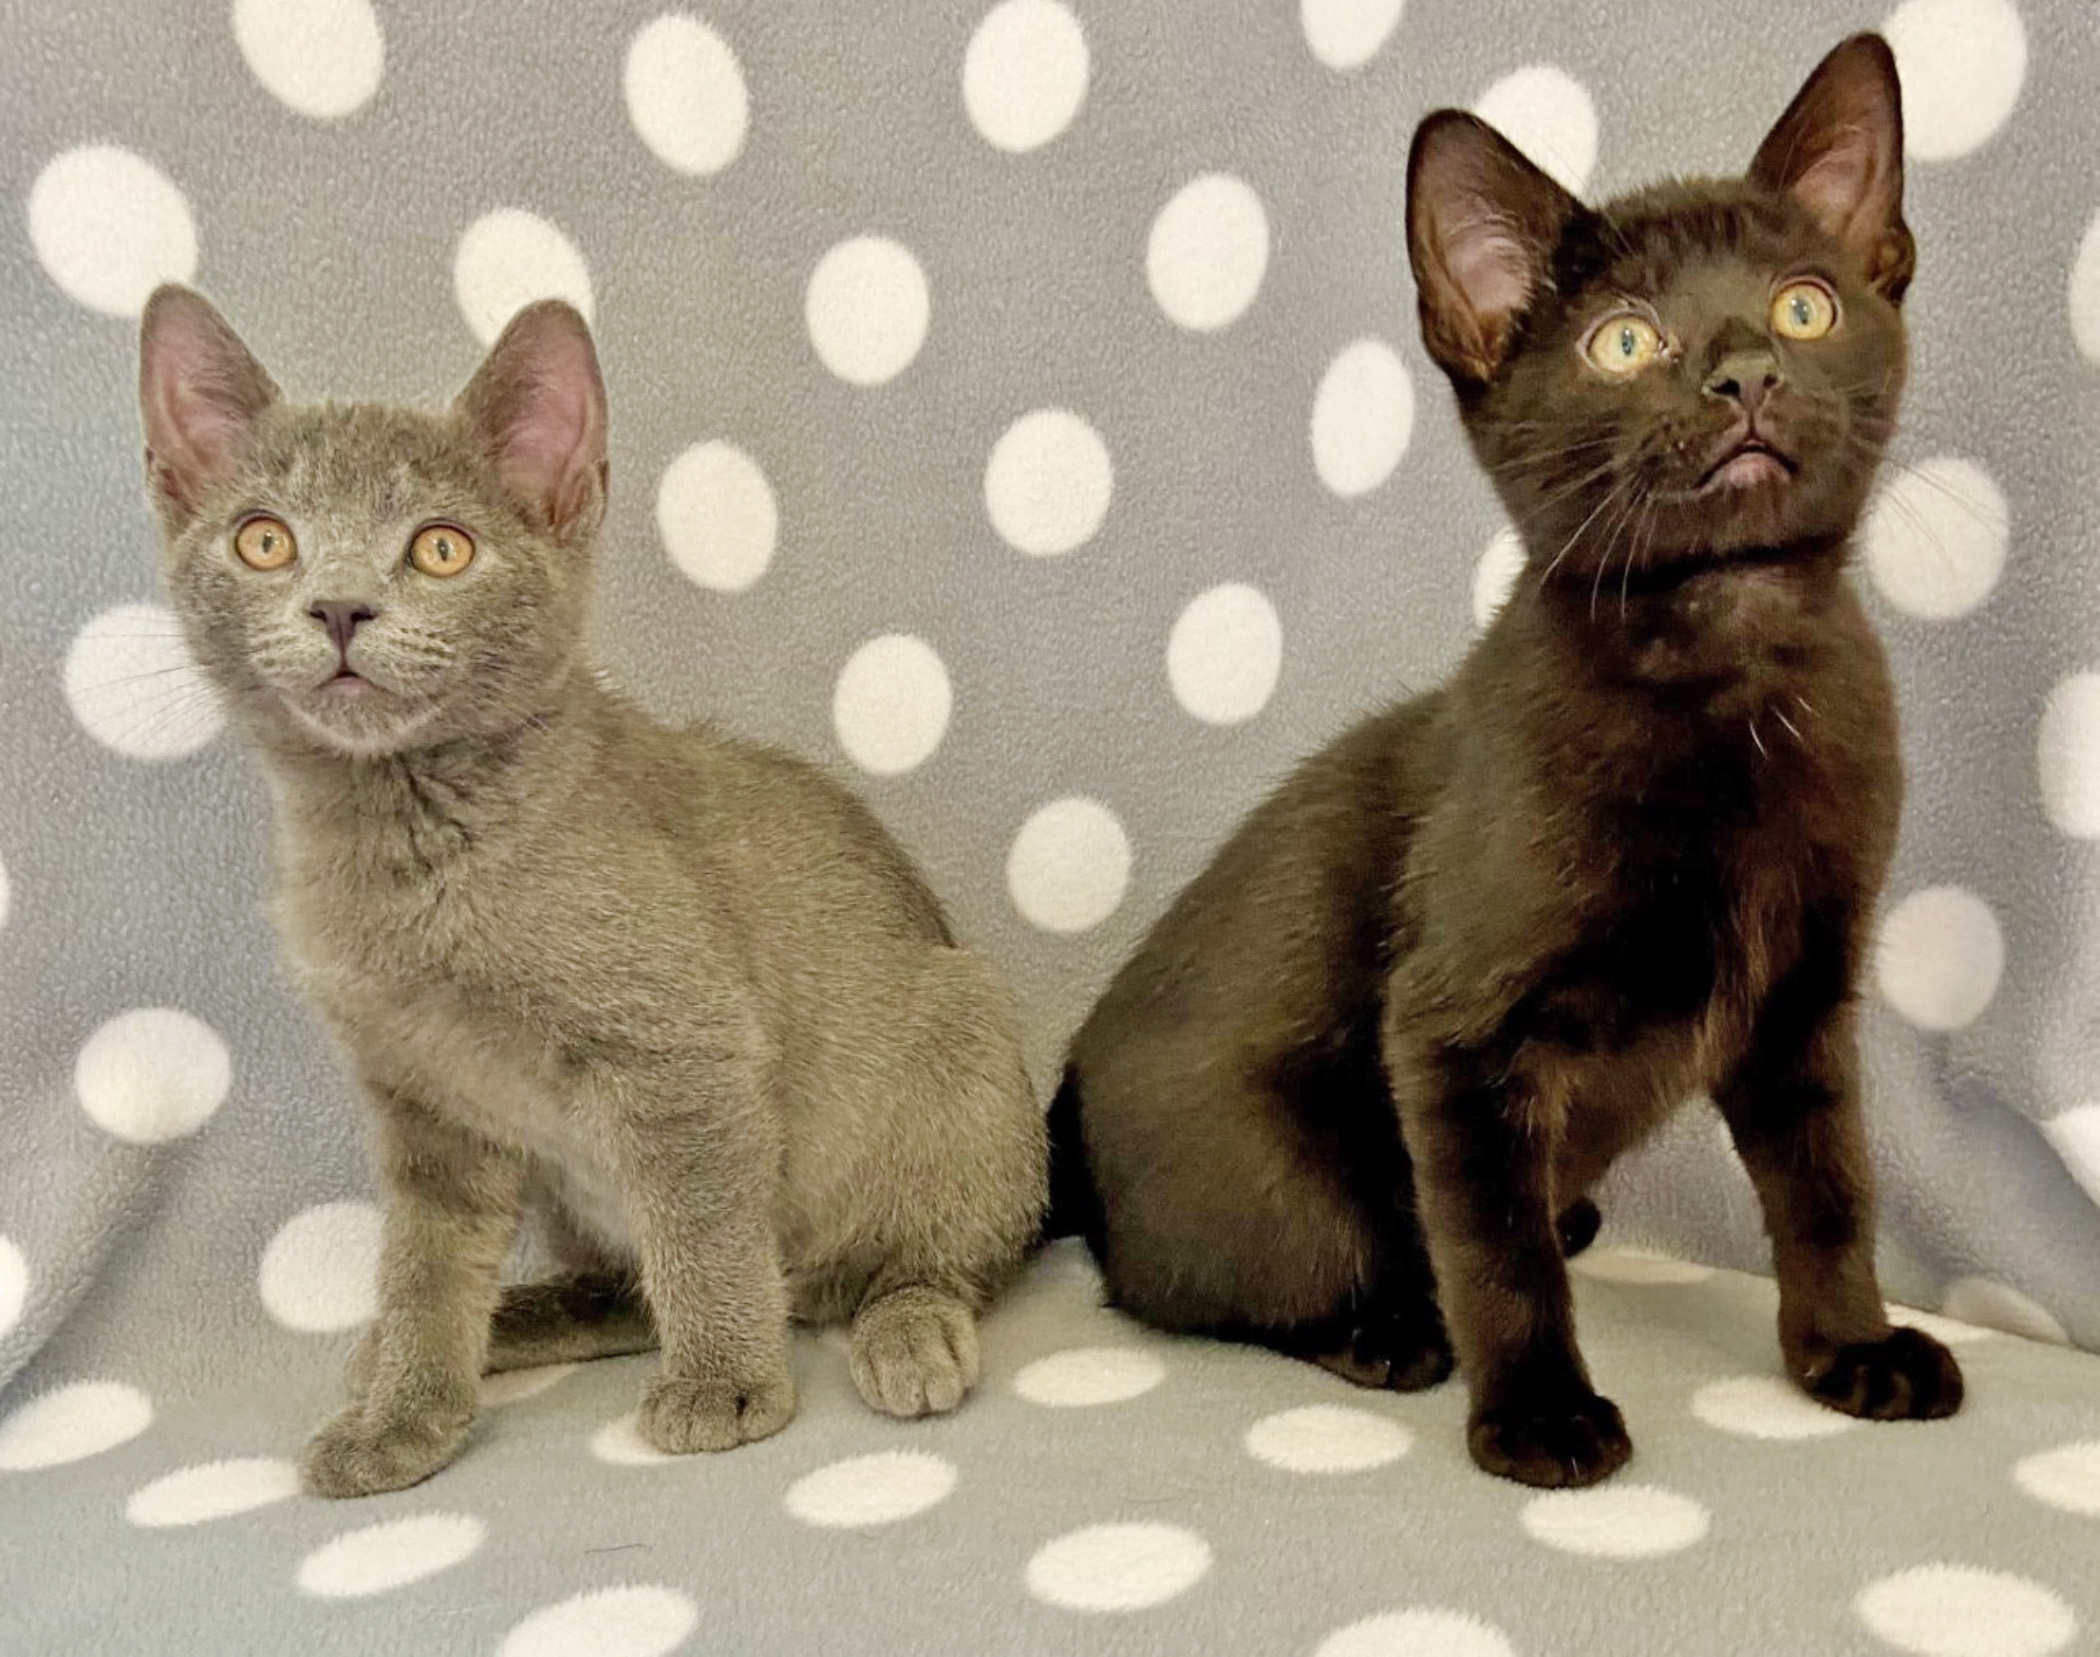 Happy Cats Haven – Pet of the Week: Meet Rafiki and Kion, two of our little Lion King Kittens! They are both confident lions-in-training, the ones who meet you at the door, ready for whatever kitten party you’ll let them throw! They do well with children and will probably be fine with a cat-savvy dog. Like all 3-month-old kittens, playtime is their favorite time of the day. Get out that kitty wand and you’ll be entertained for hours. Once the party settles down, these boys can always be found grooming and snuggling together. Are you the family with room in your home and hearts for both of them? They can be adopted together for $210, which includes their neuters, vaccinations, microchips, food and litter starter kits, and a free well-kitty checkup each. Happy Cats Haven: 719-362-4600, 327 Manitou Ave. Adoptions by appointment only until further notice.www.HappyCatsHaven.org, www.Facebook.com/HappyCatsHaven.